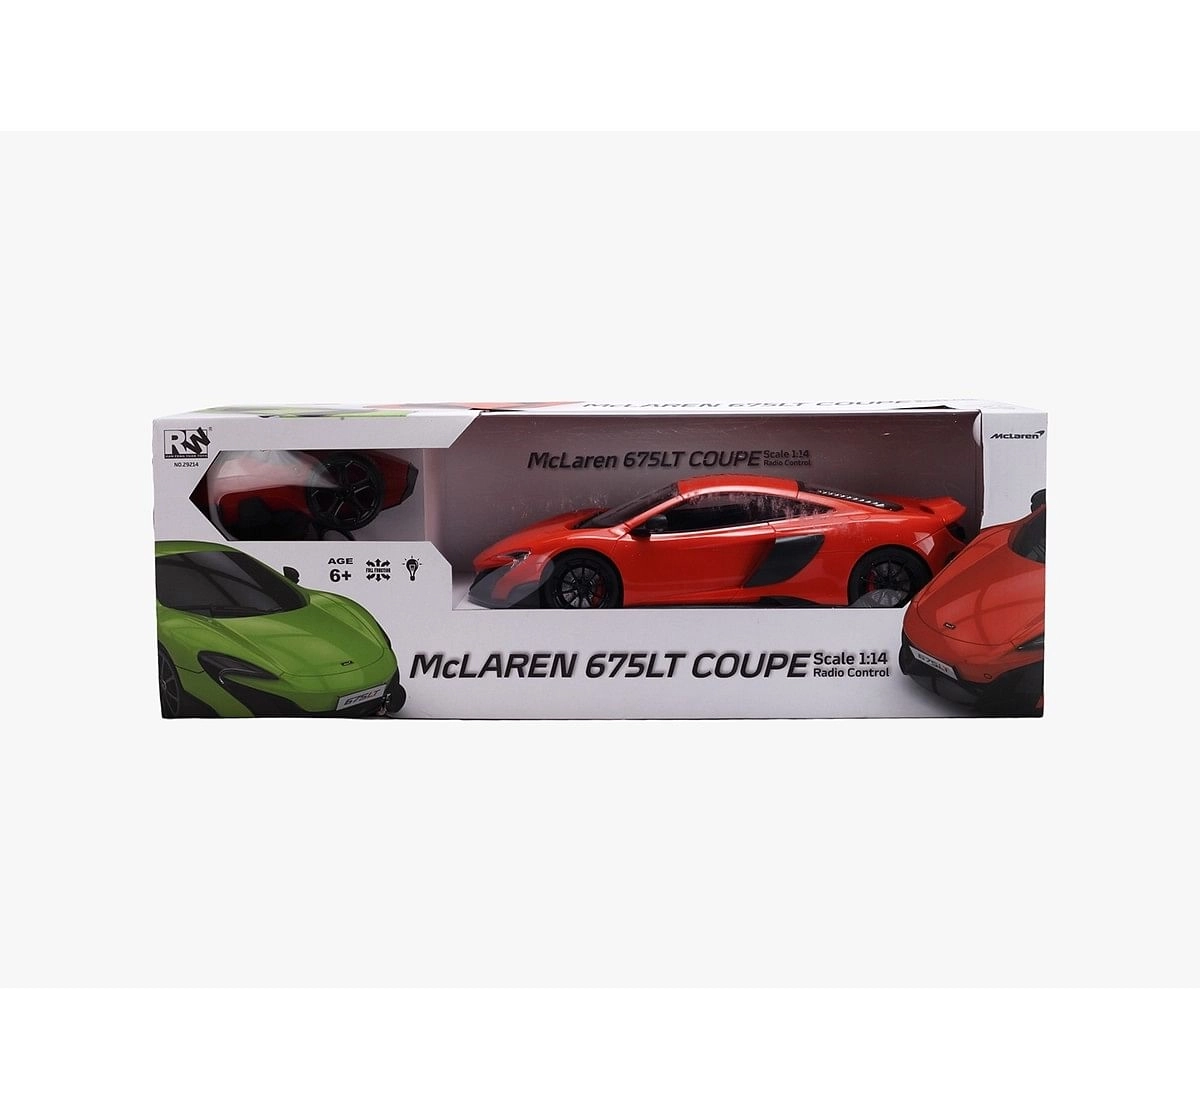 RW 1:14 McLaren 675LT Coupe Remote Control Car Remote Control Toys for Kids age 6Y+ (Green)